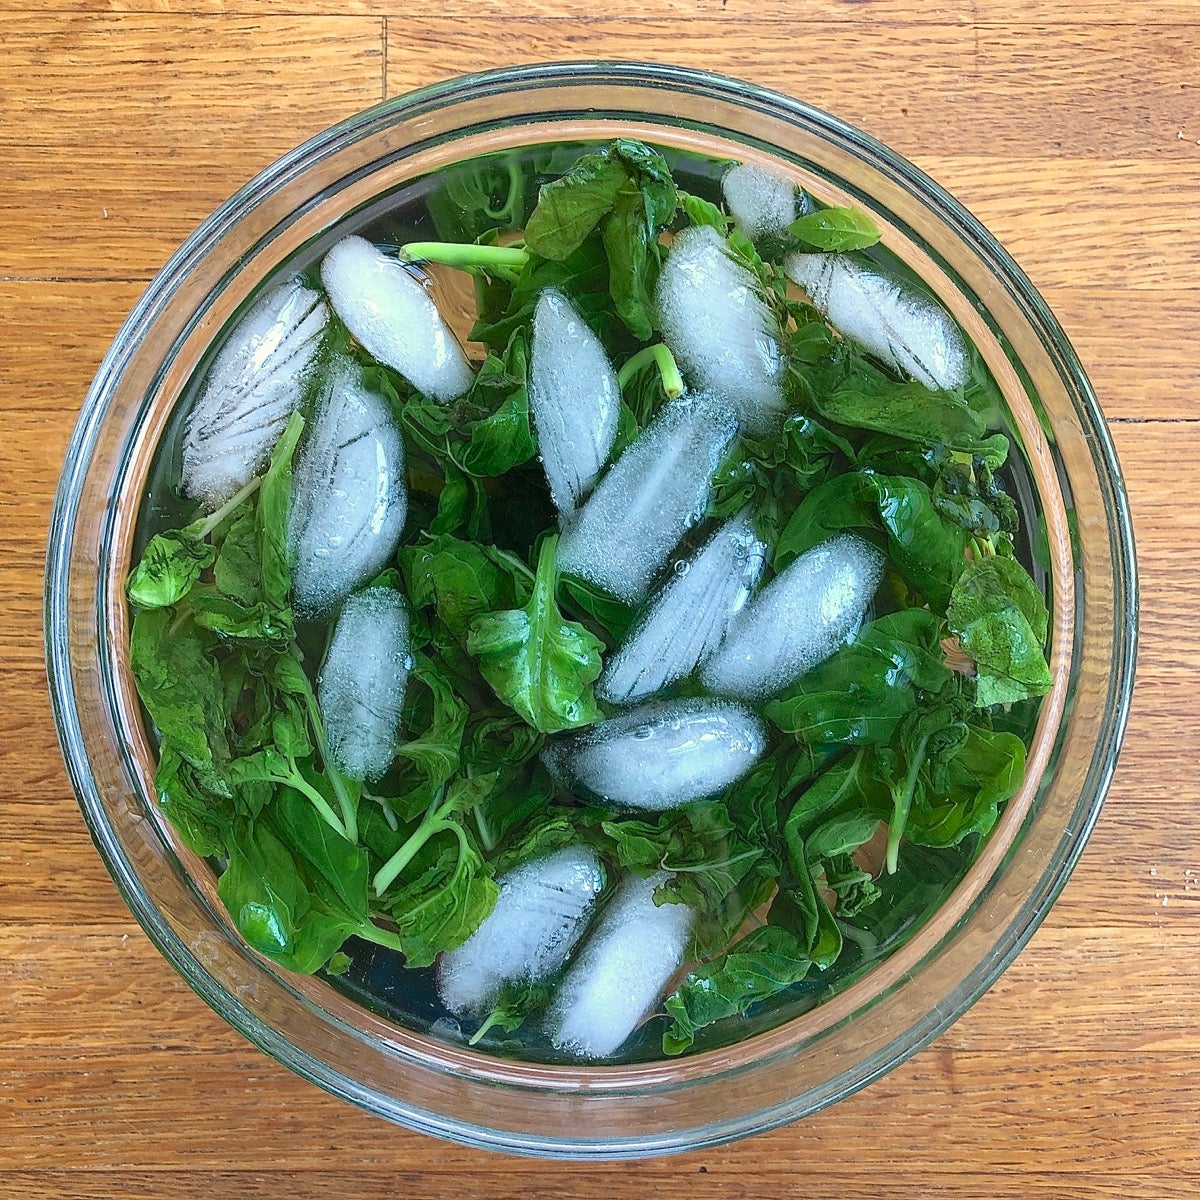 Blanched fresh basil leaves cooling in an ice water bath.